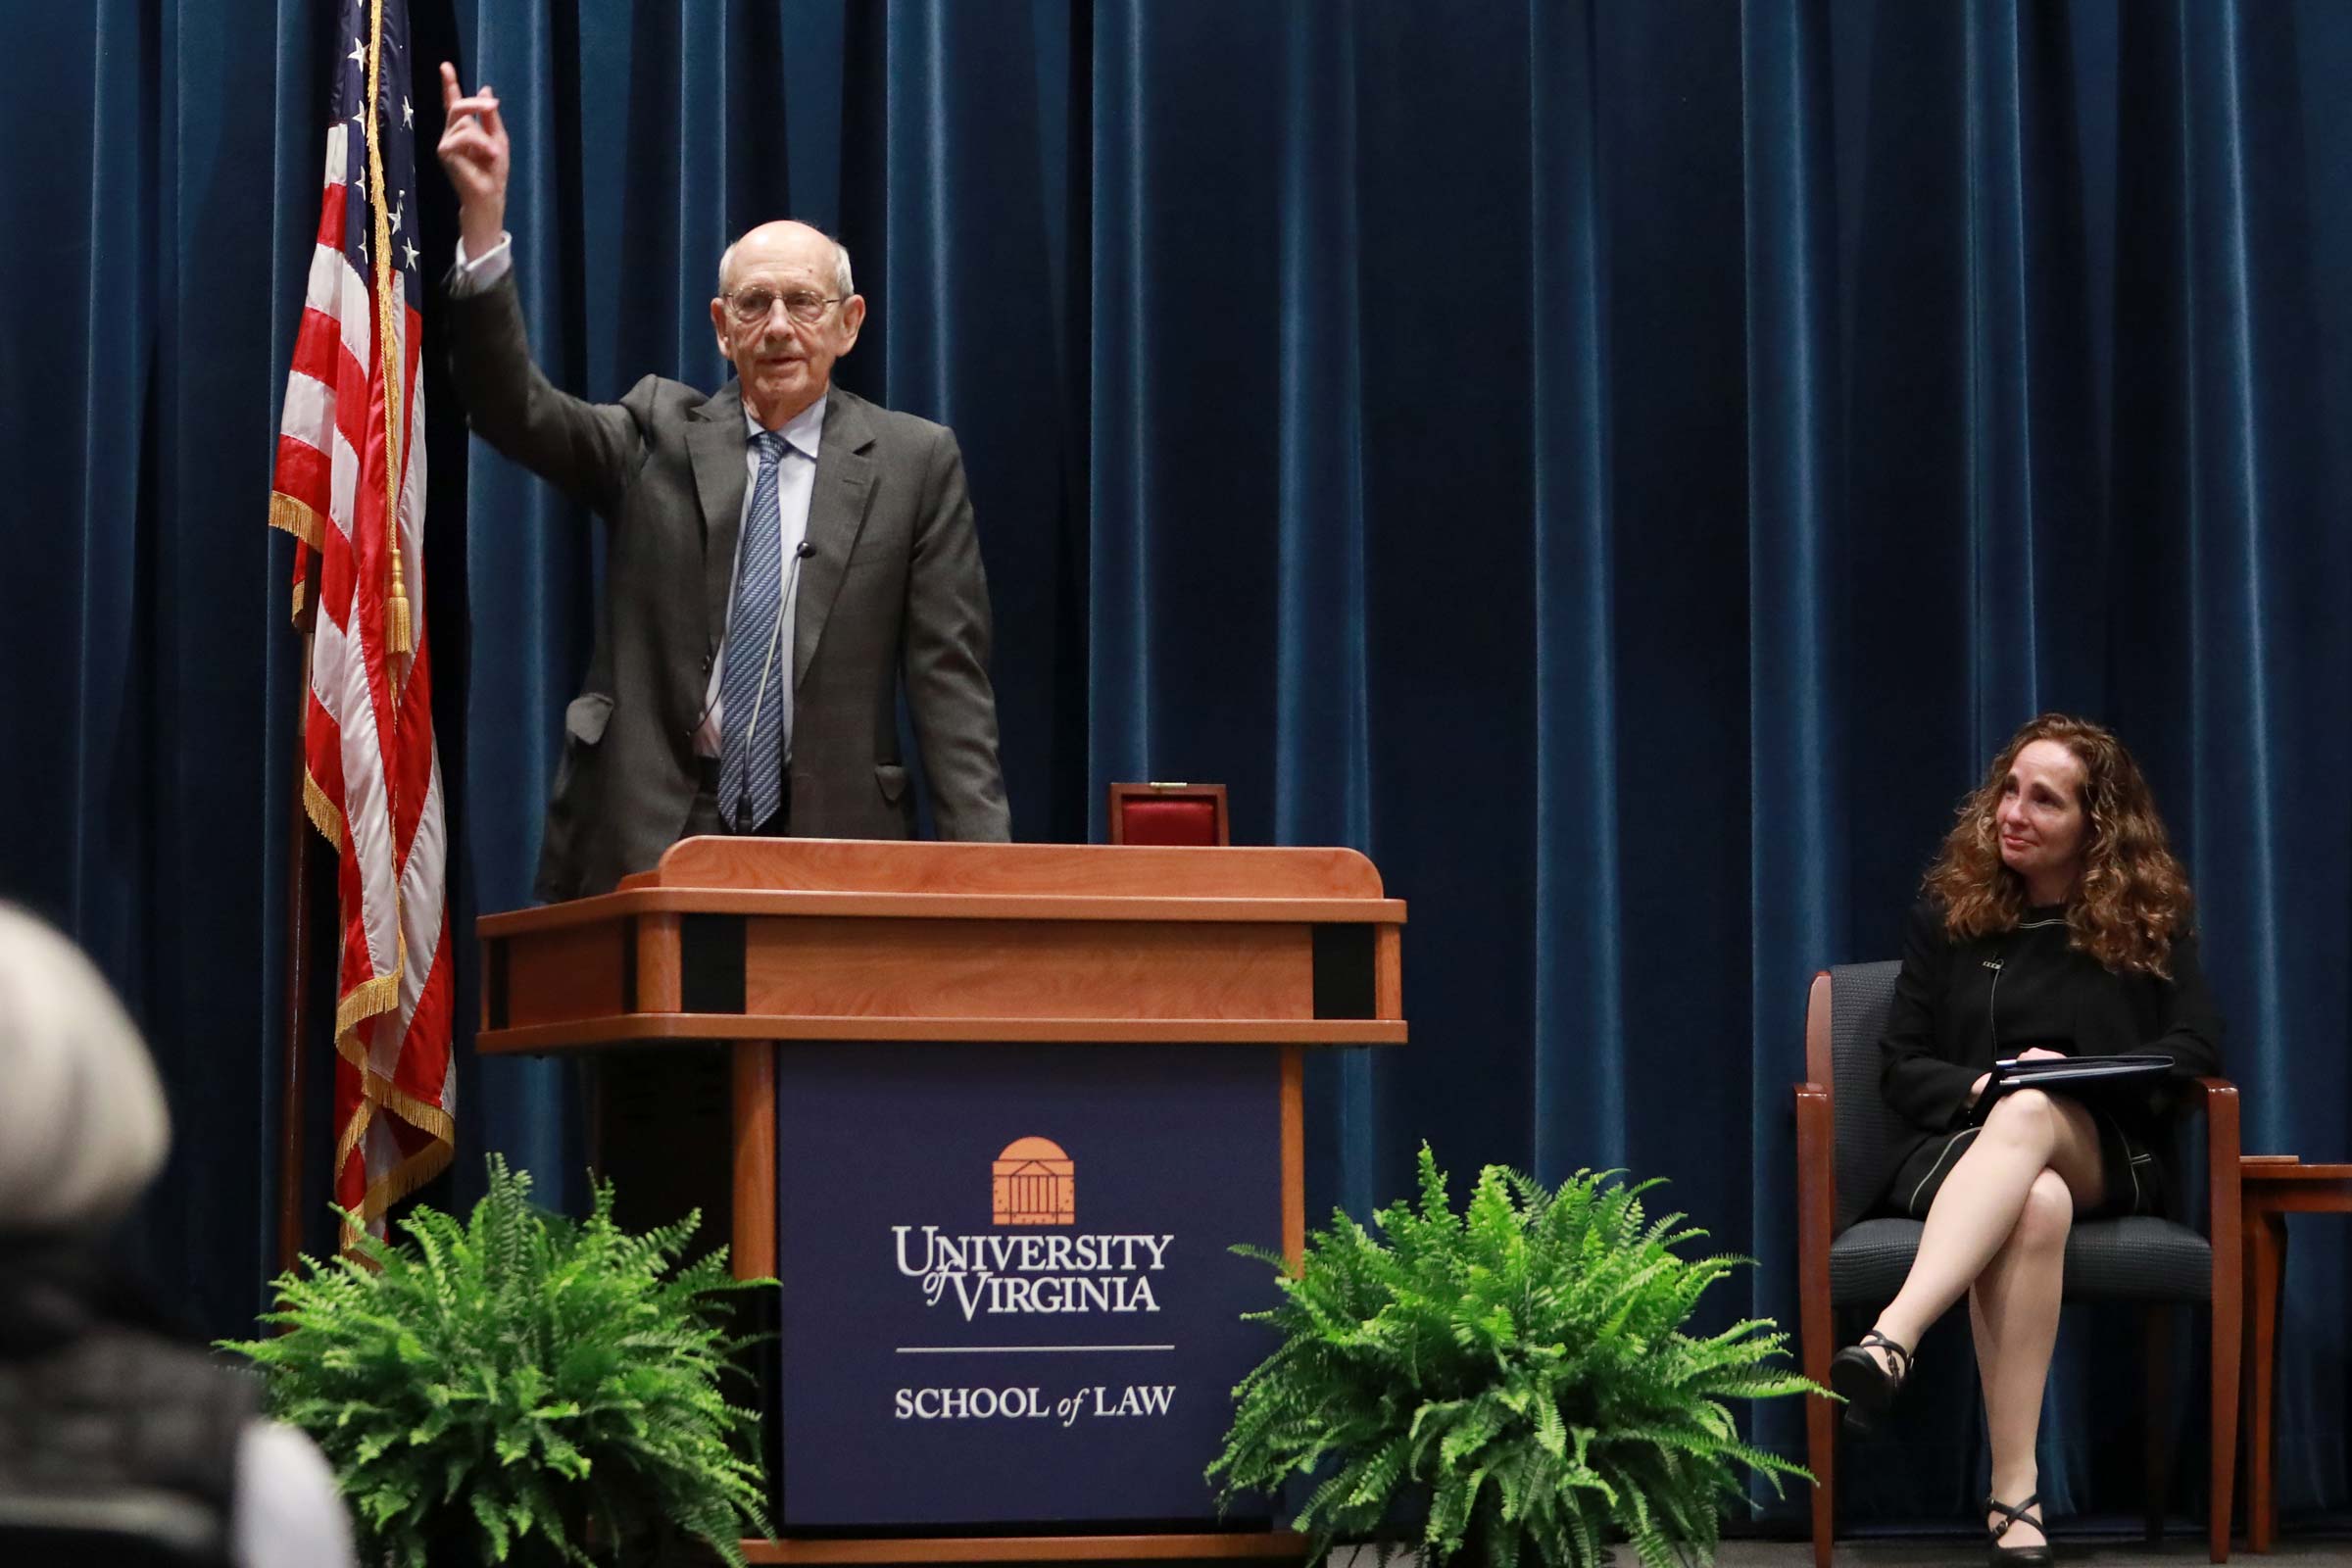 U.S. Supreme Court Justice Stephen Breyer, speaking at a podium, points a finger up. UVA Law School Dean Risa Goluboff looks on from the stage.